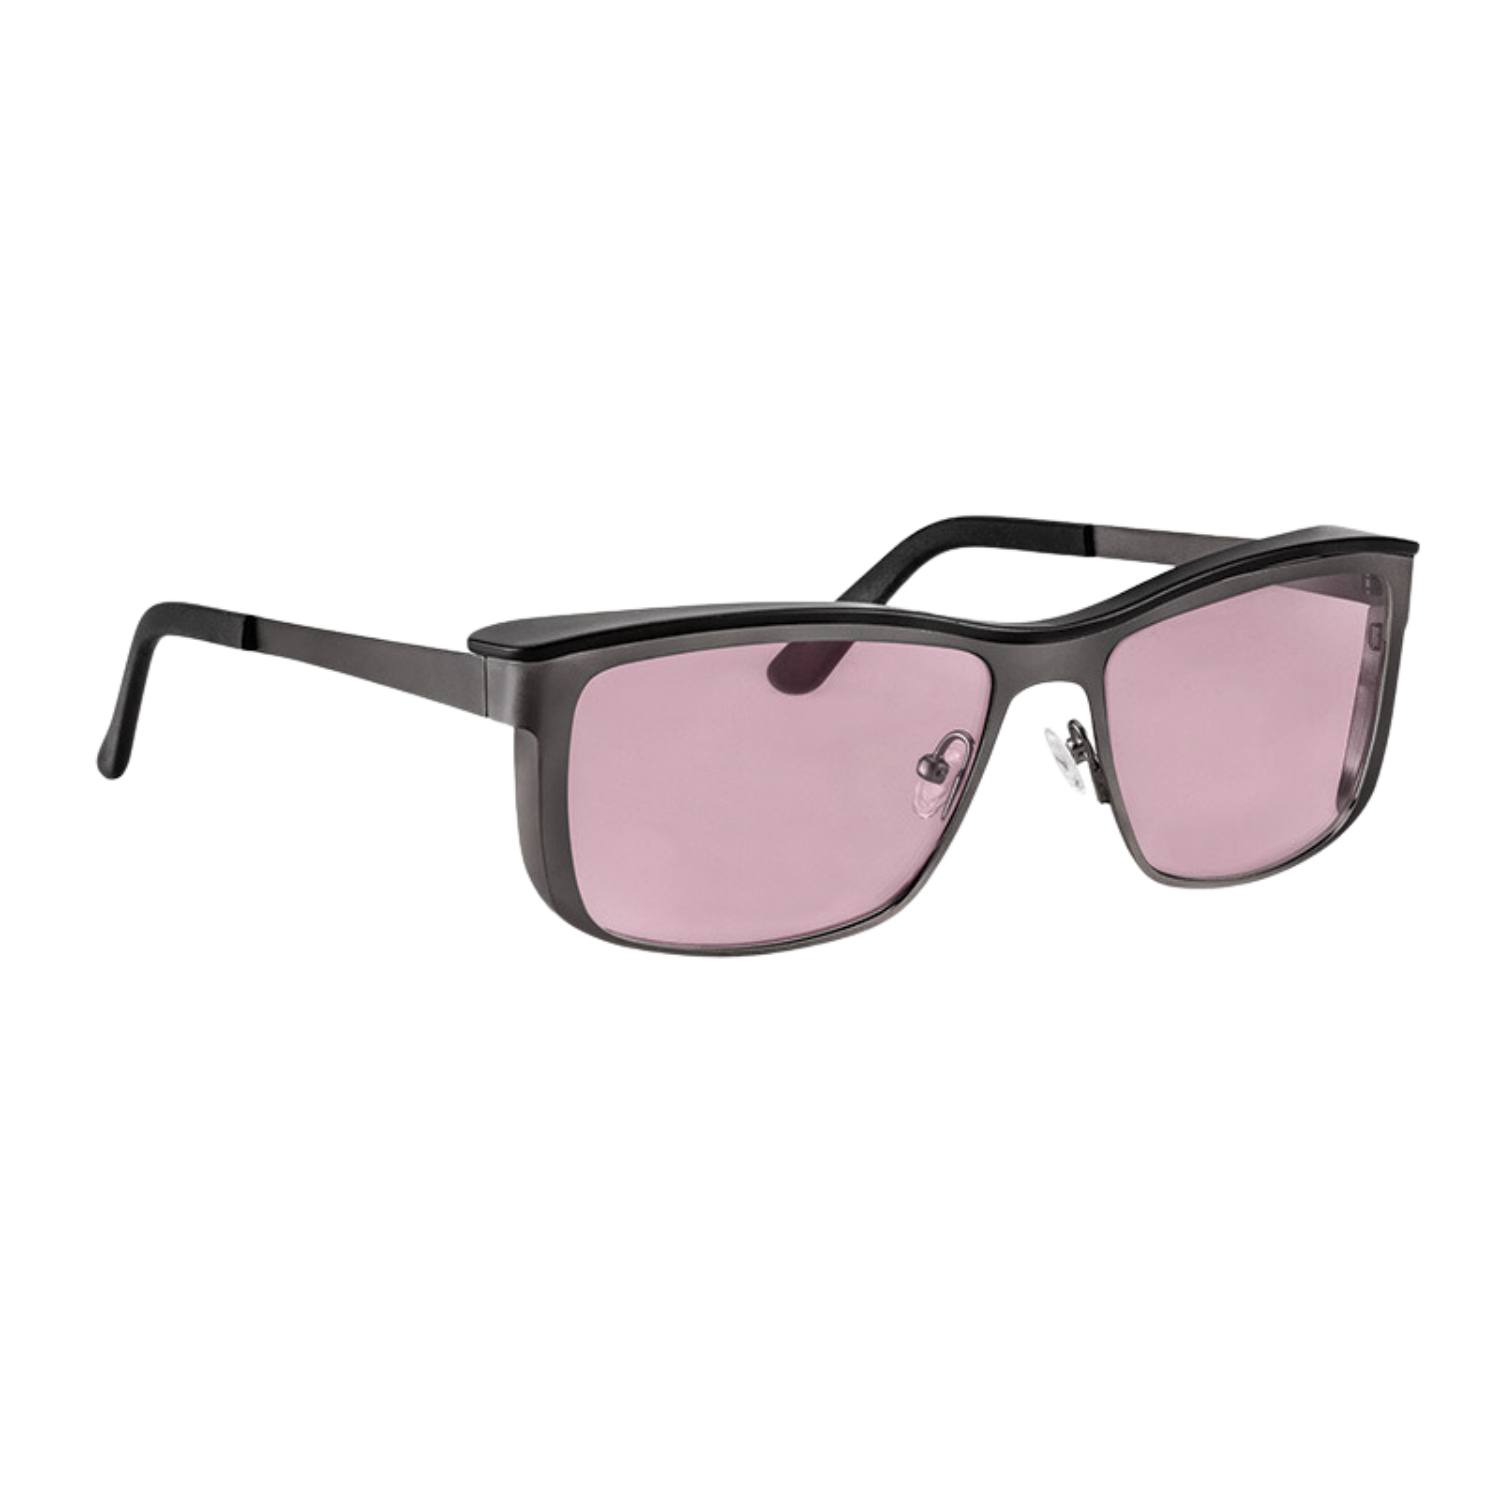 Image of the Eschenbach Acunis FL-41 25% Light Sensitivity Glasses - Anthracite Stainless Steel Frames.